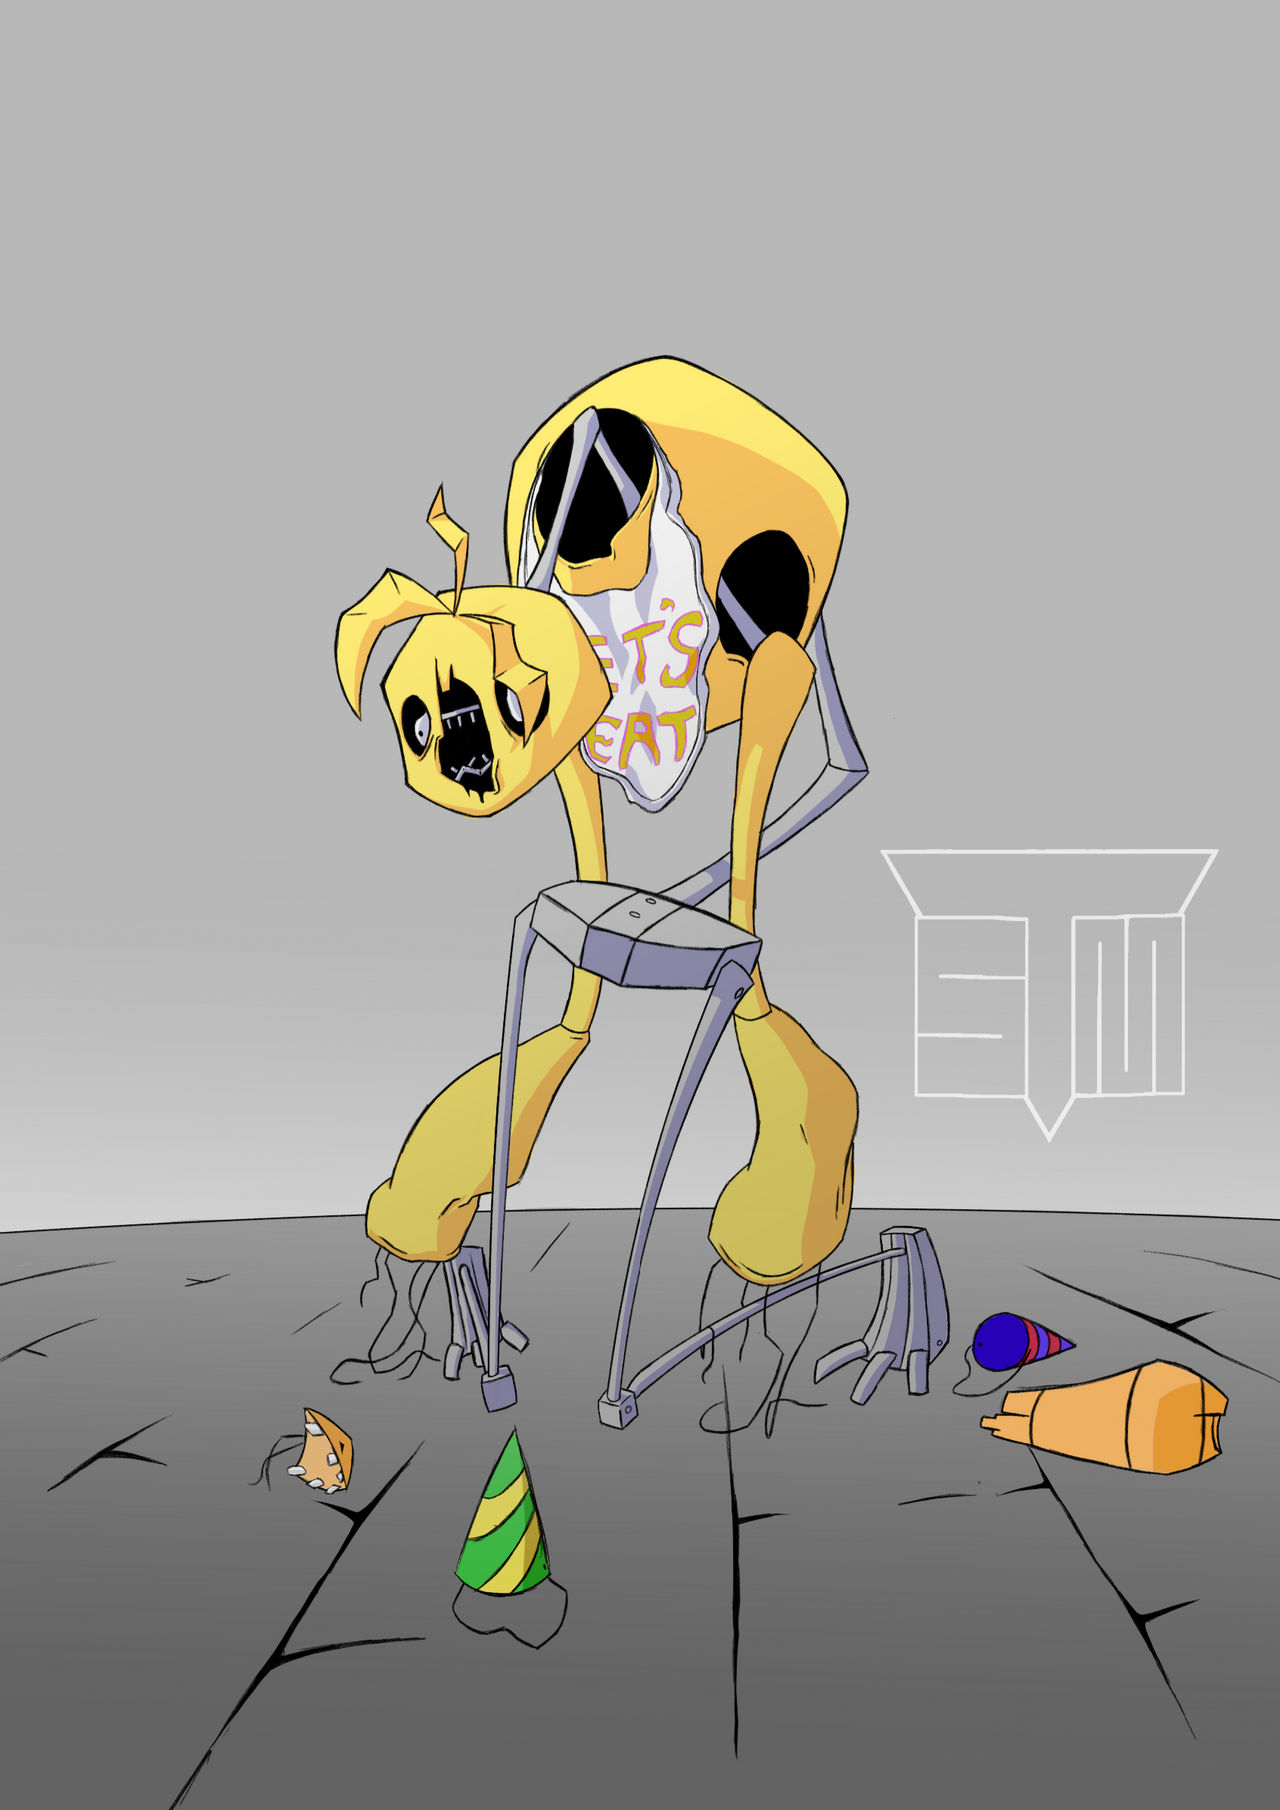 FNAF - Withered Chica by BootsDotEXE on DeviantArt